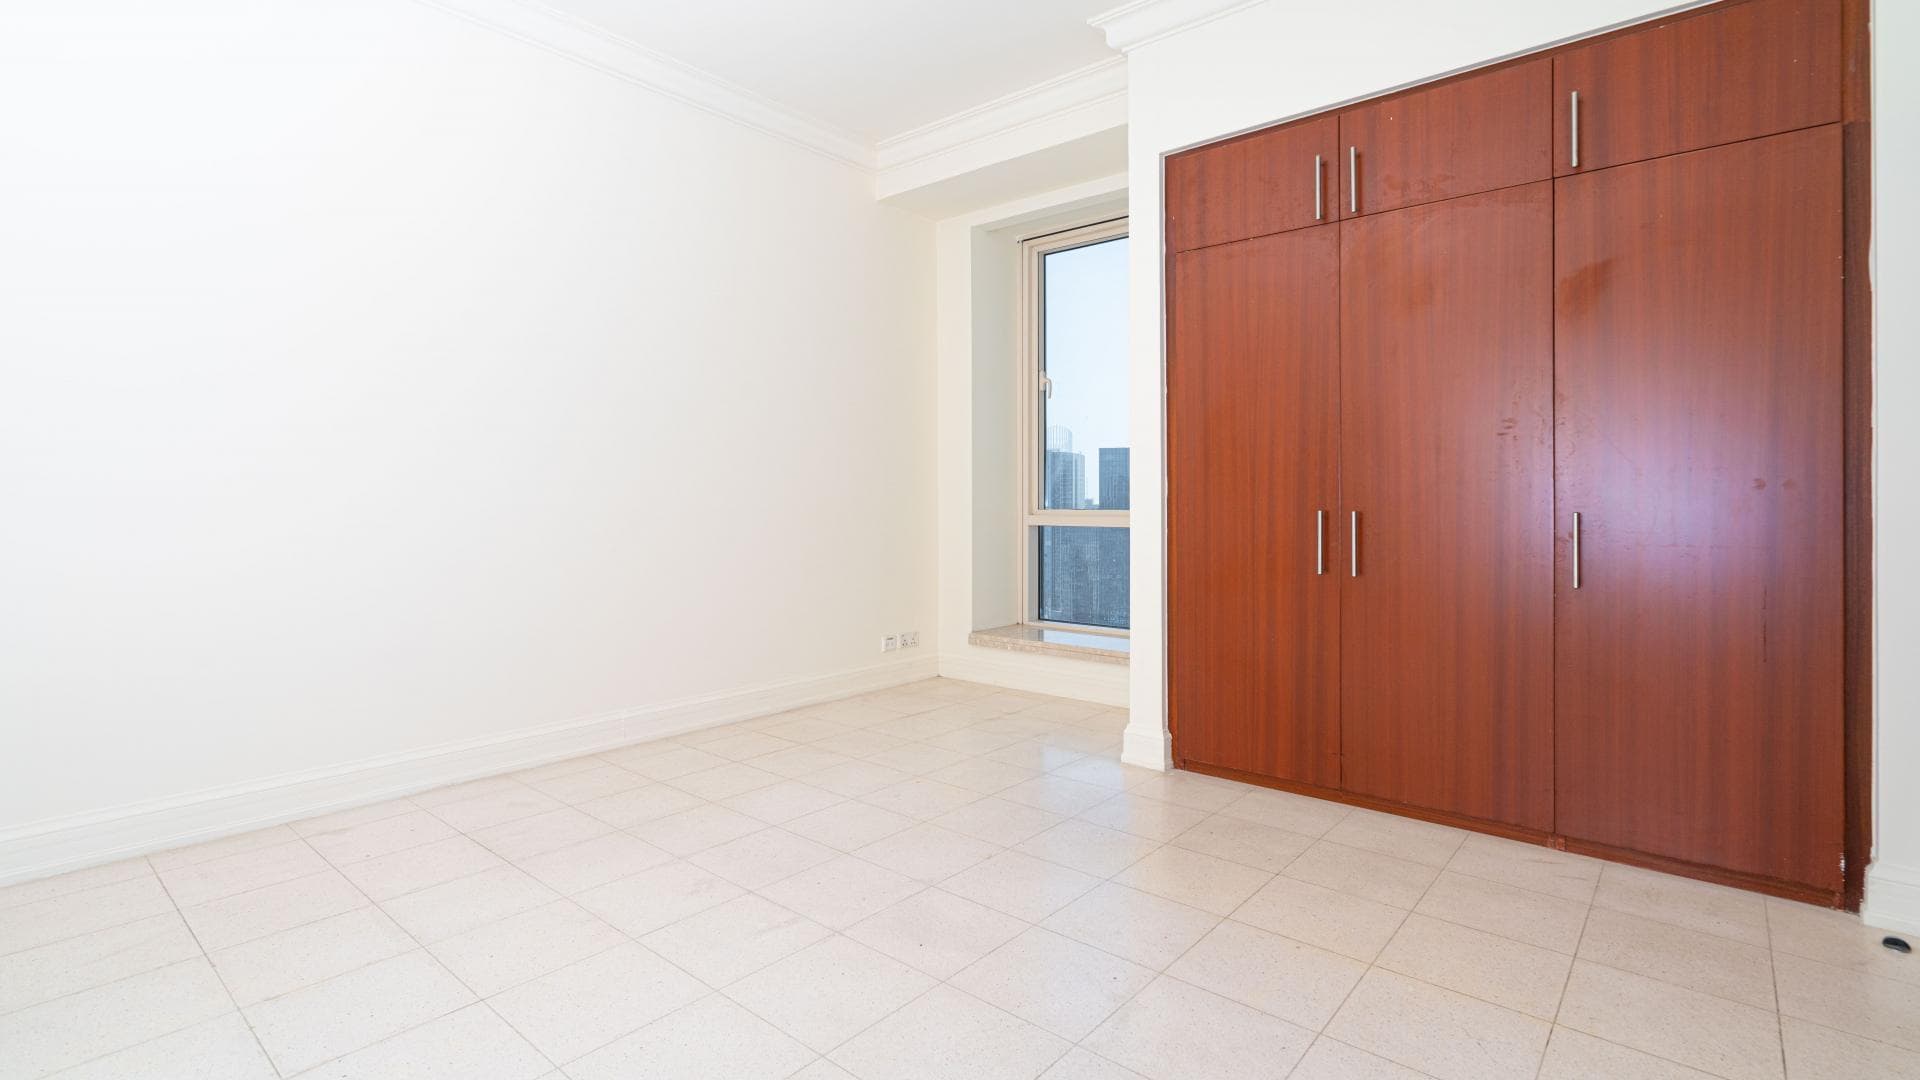 3 Bedroom Apartment For Sale Emaar 6 Towers Lp36415 1226a07f3000f900.jpg